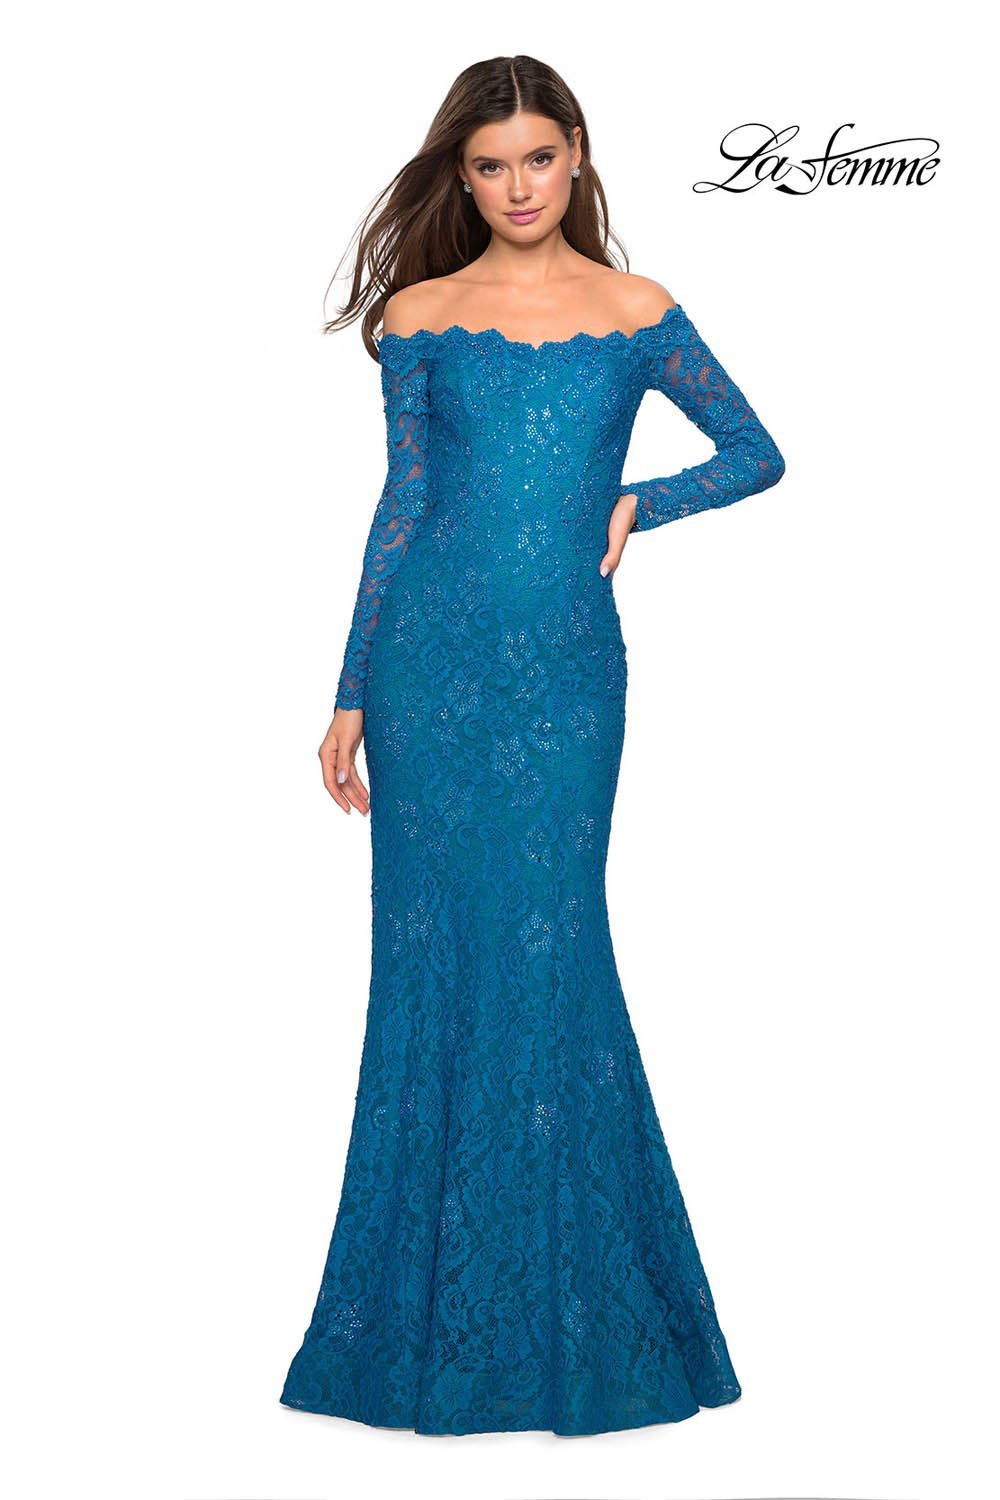 La Femme 26393 dress images in these colors: Black, Dark Turquoise, White.